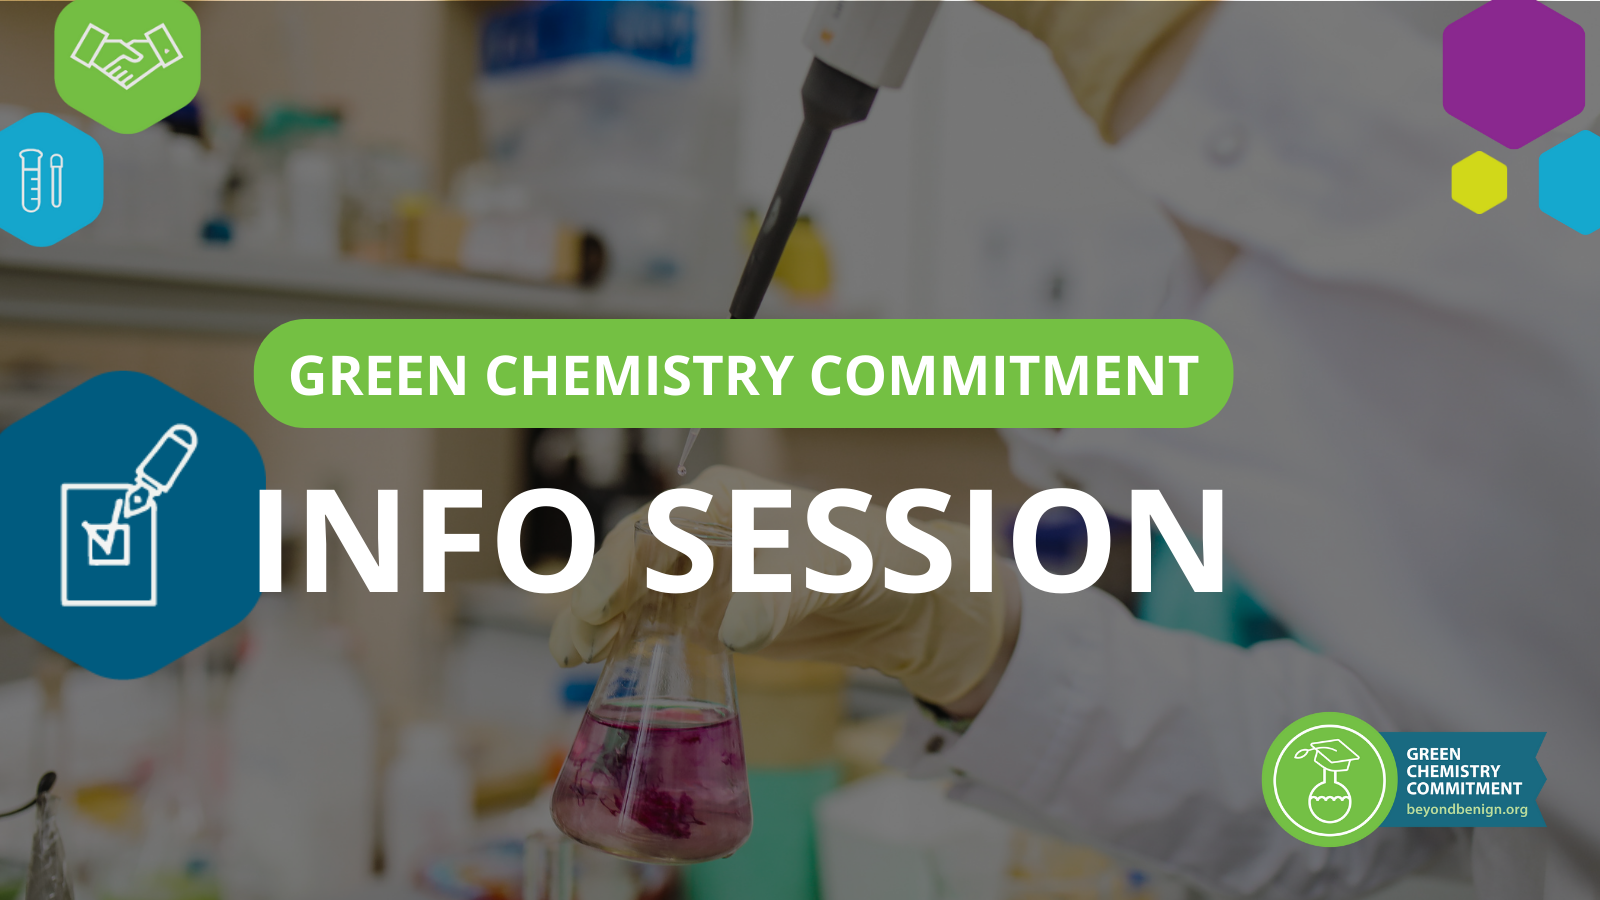 Image of chemist with title in center: Green Chemistry Commitment Info Session